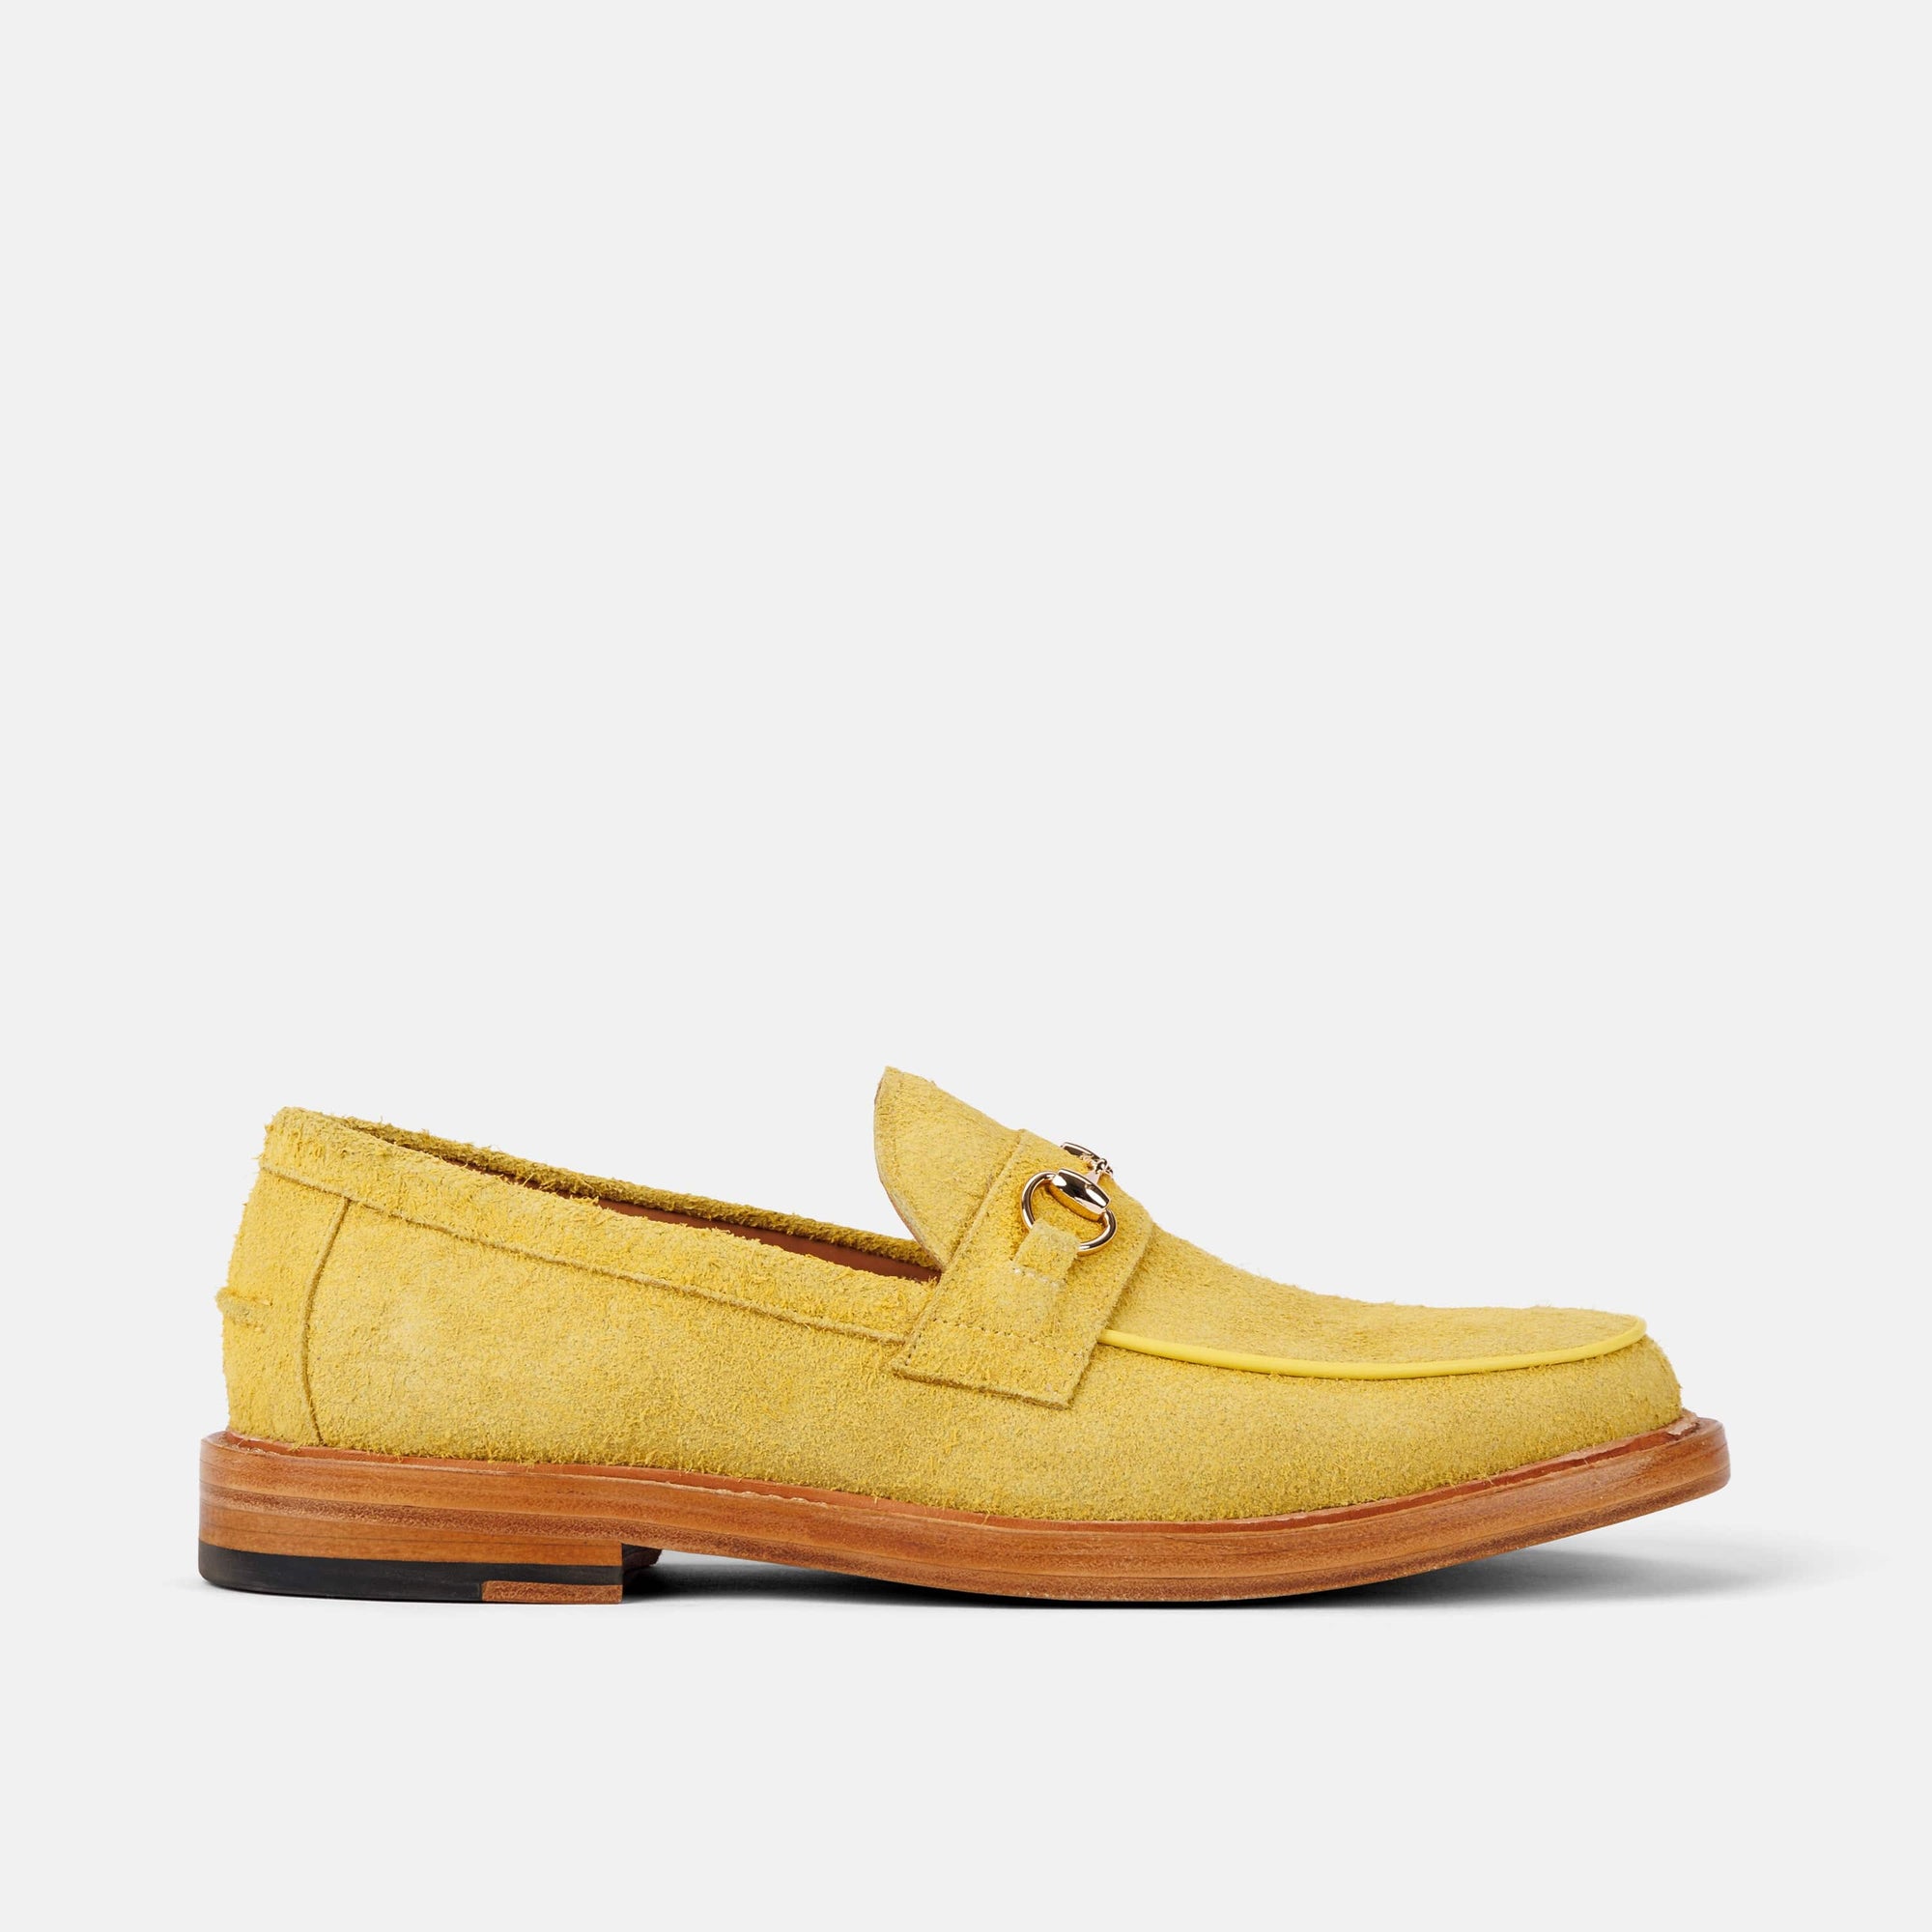 Boardwalk Canary Yellow Suede Horse-Bit Loafers